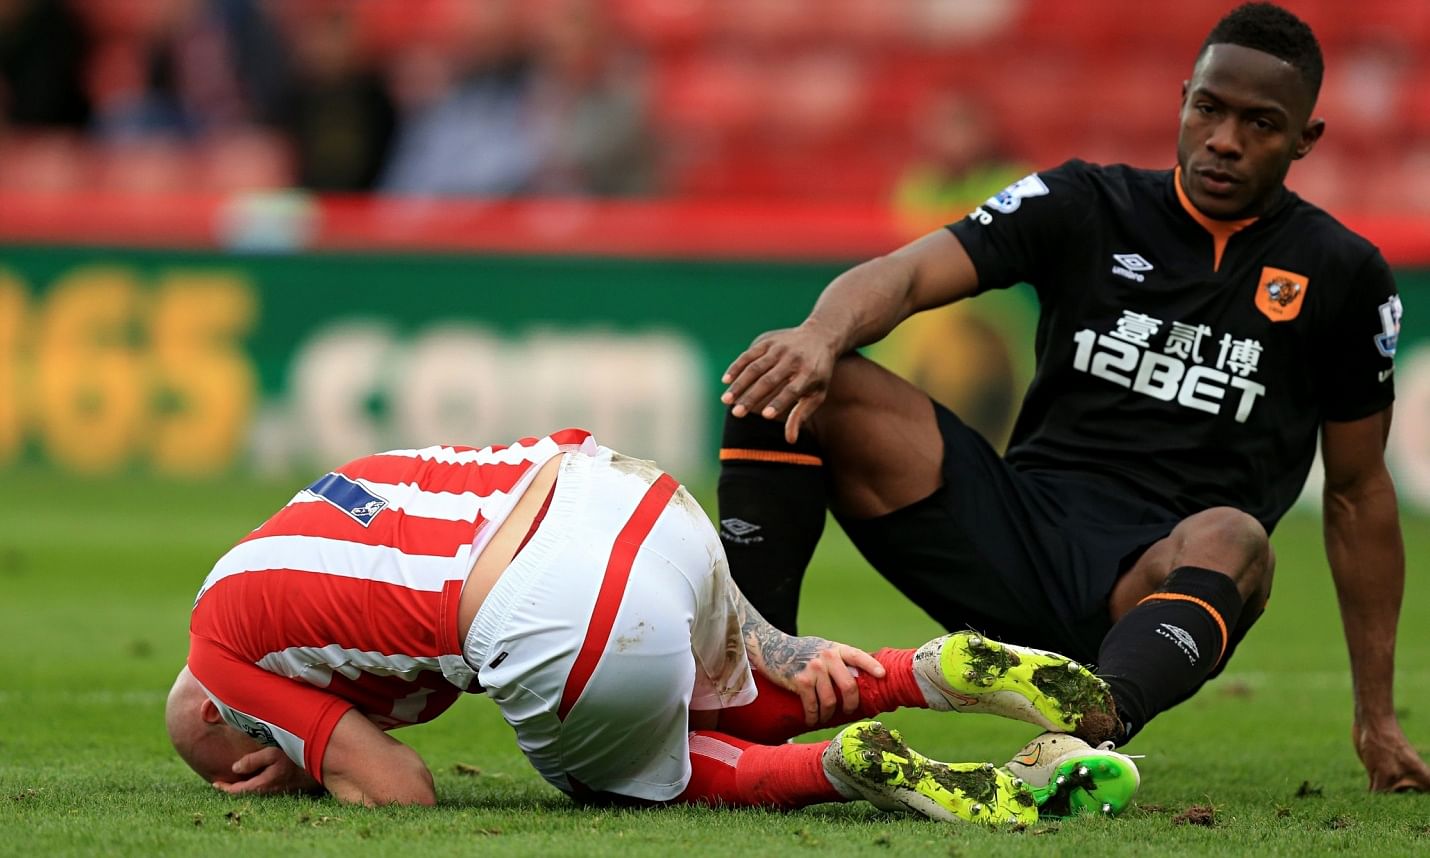 Gruesome image of Stephen Ireland's calf injury surfaces after horror tackle1430 x 858